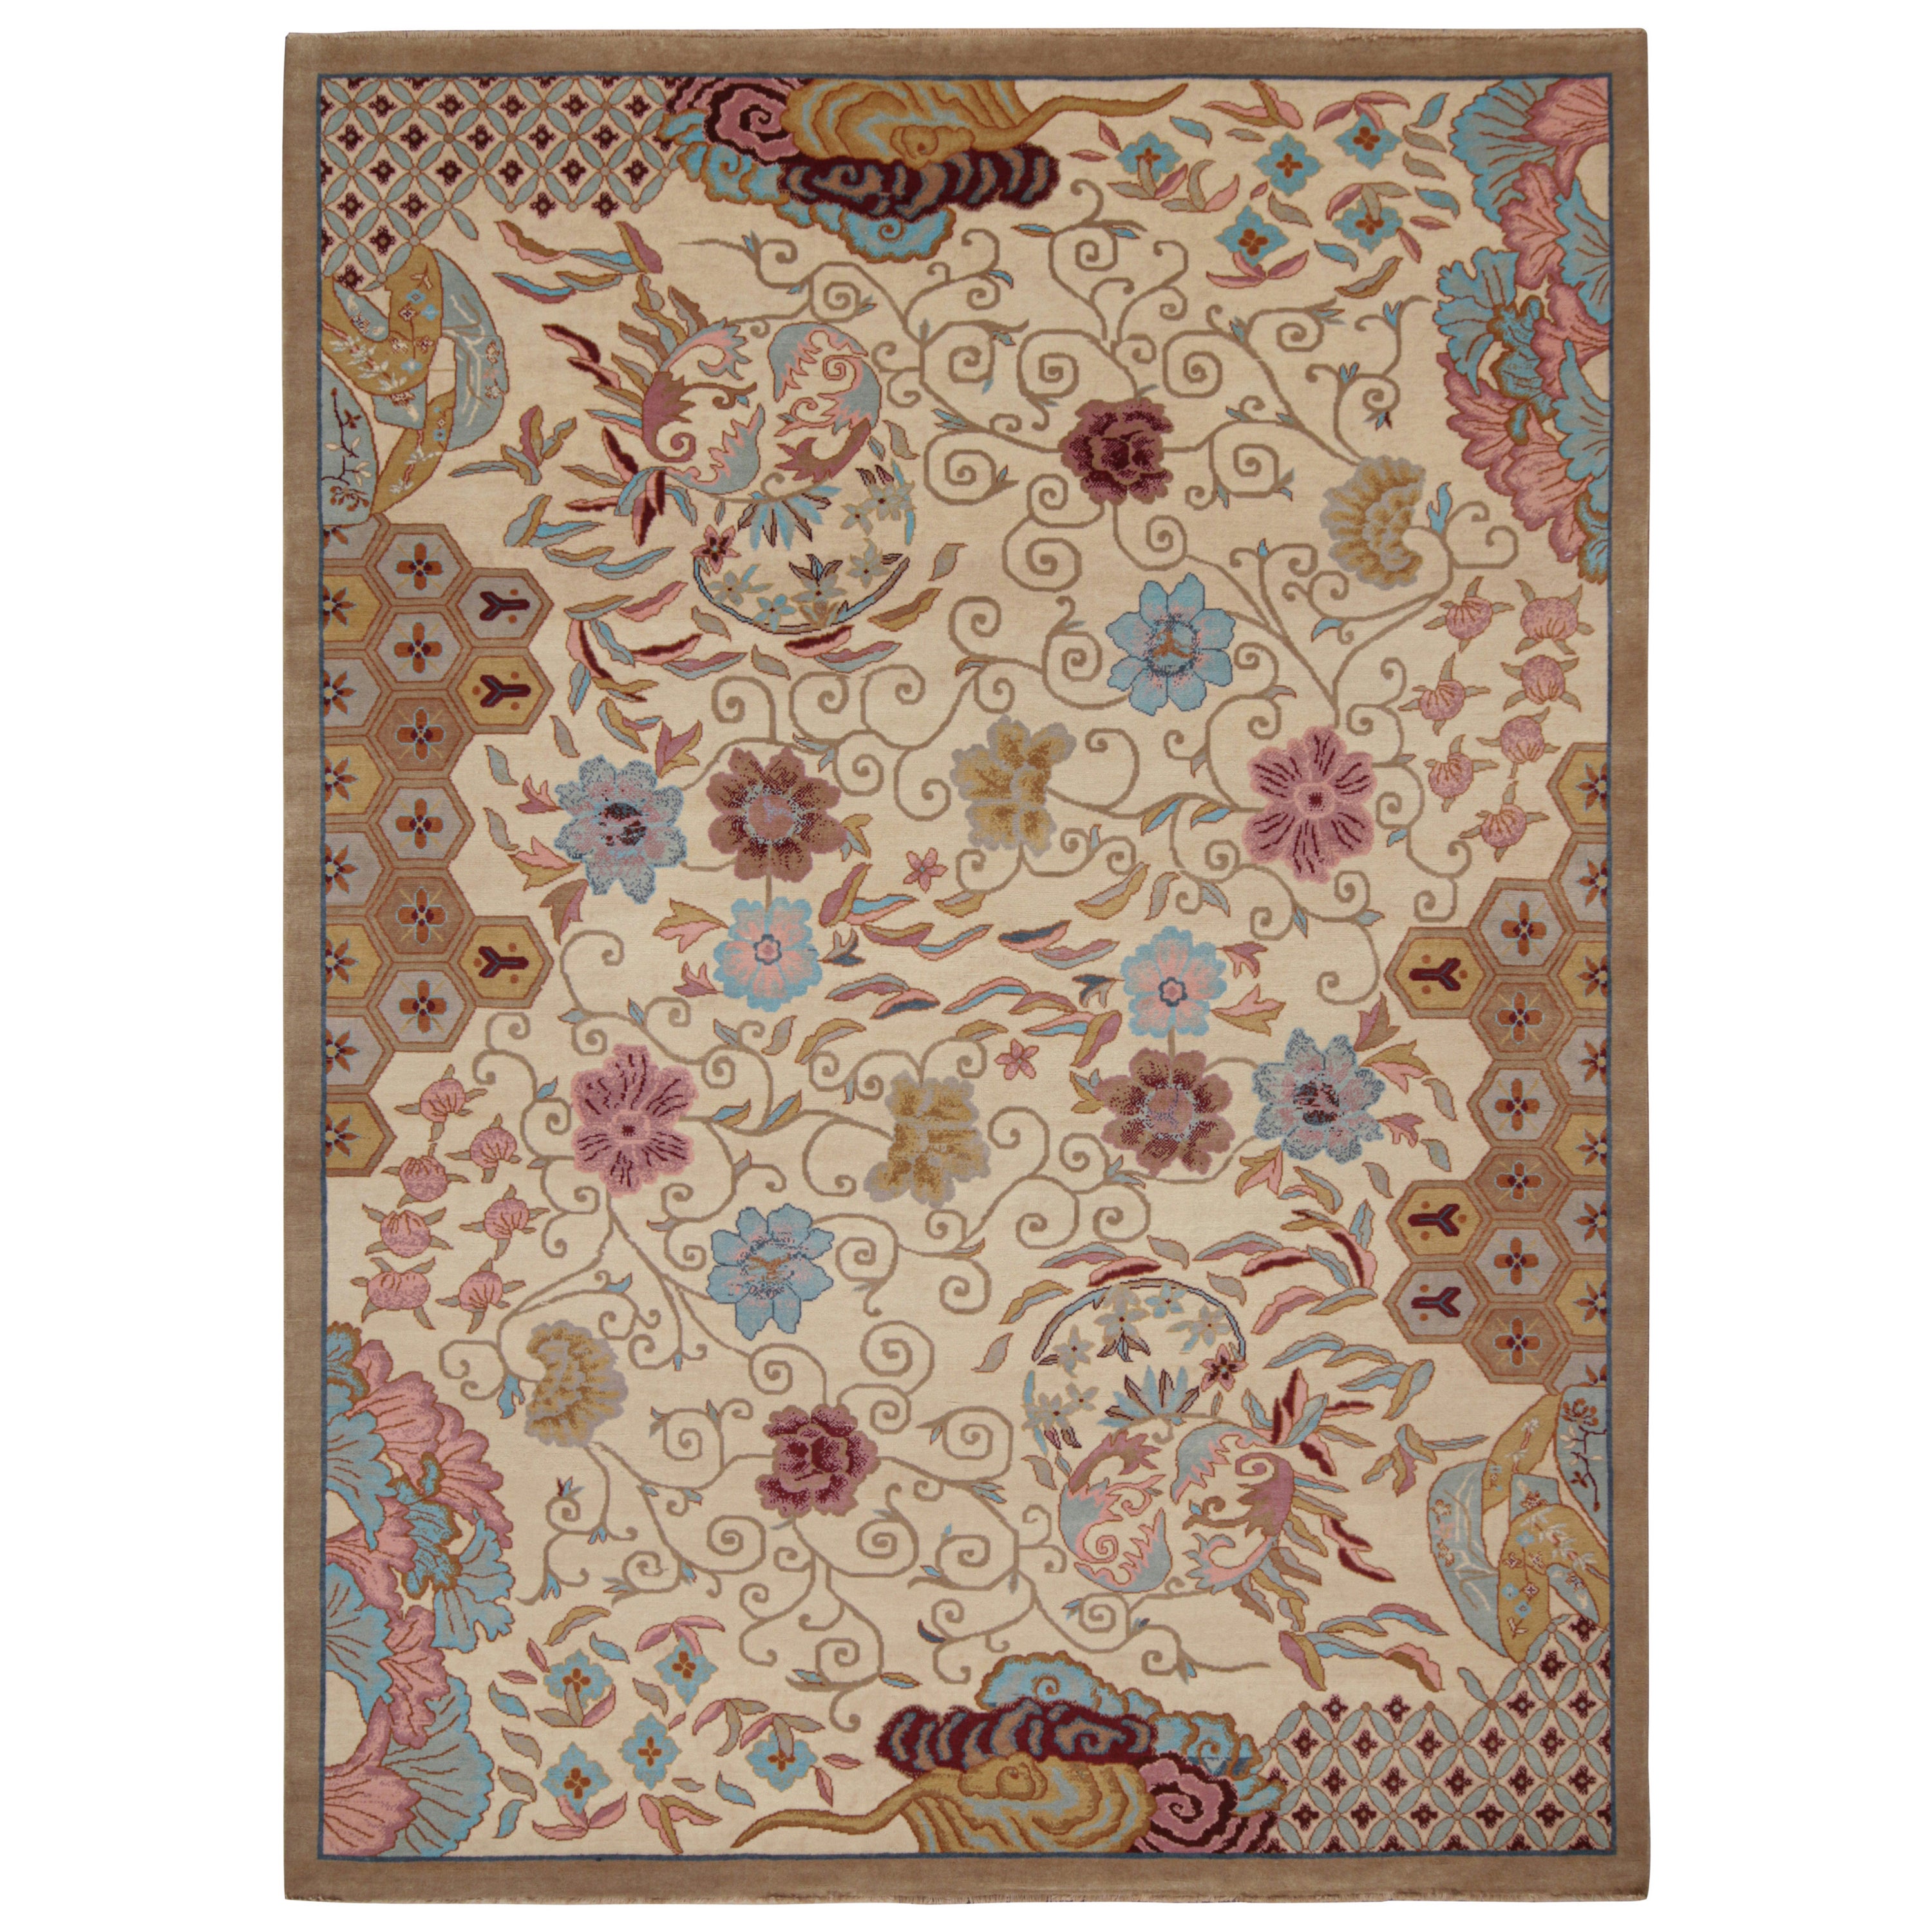 Rug & Kilim’s Chinese Art Deco Style Rug in Beige-Brown with Floral Patterns